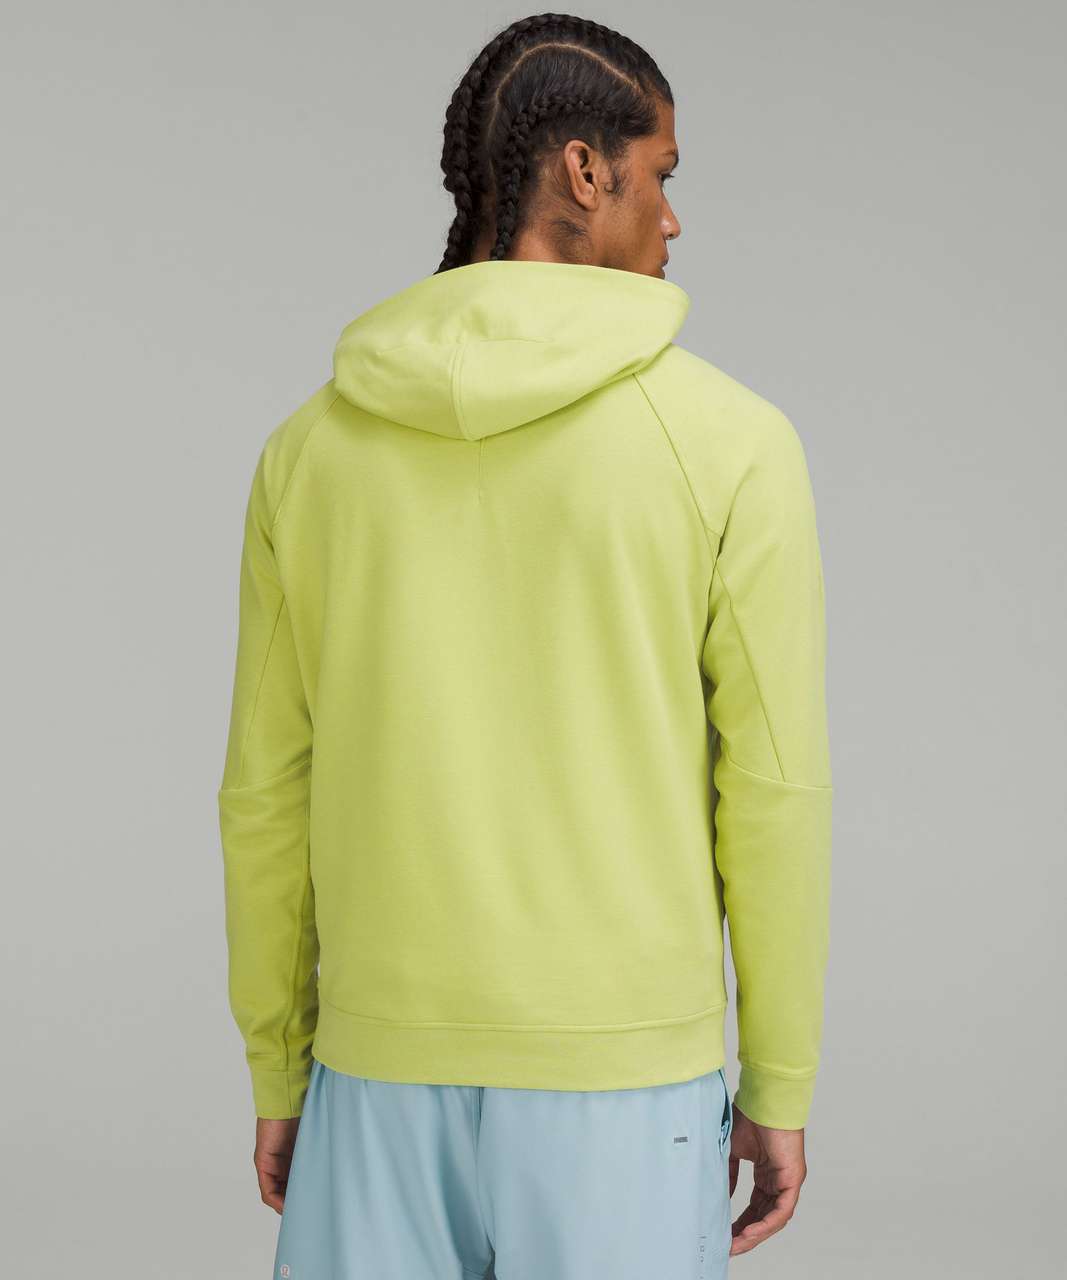 Lululemon City Sweat Pullover Hoodie French Terry - Wasabi